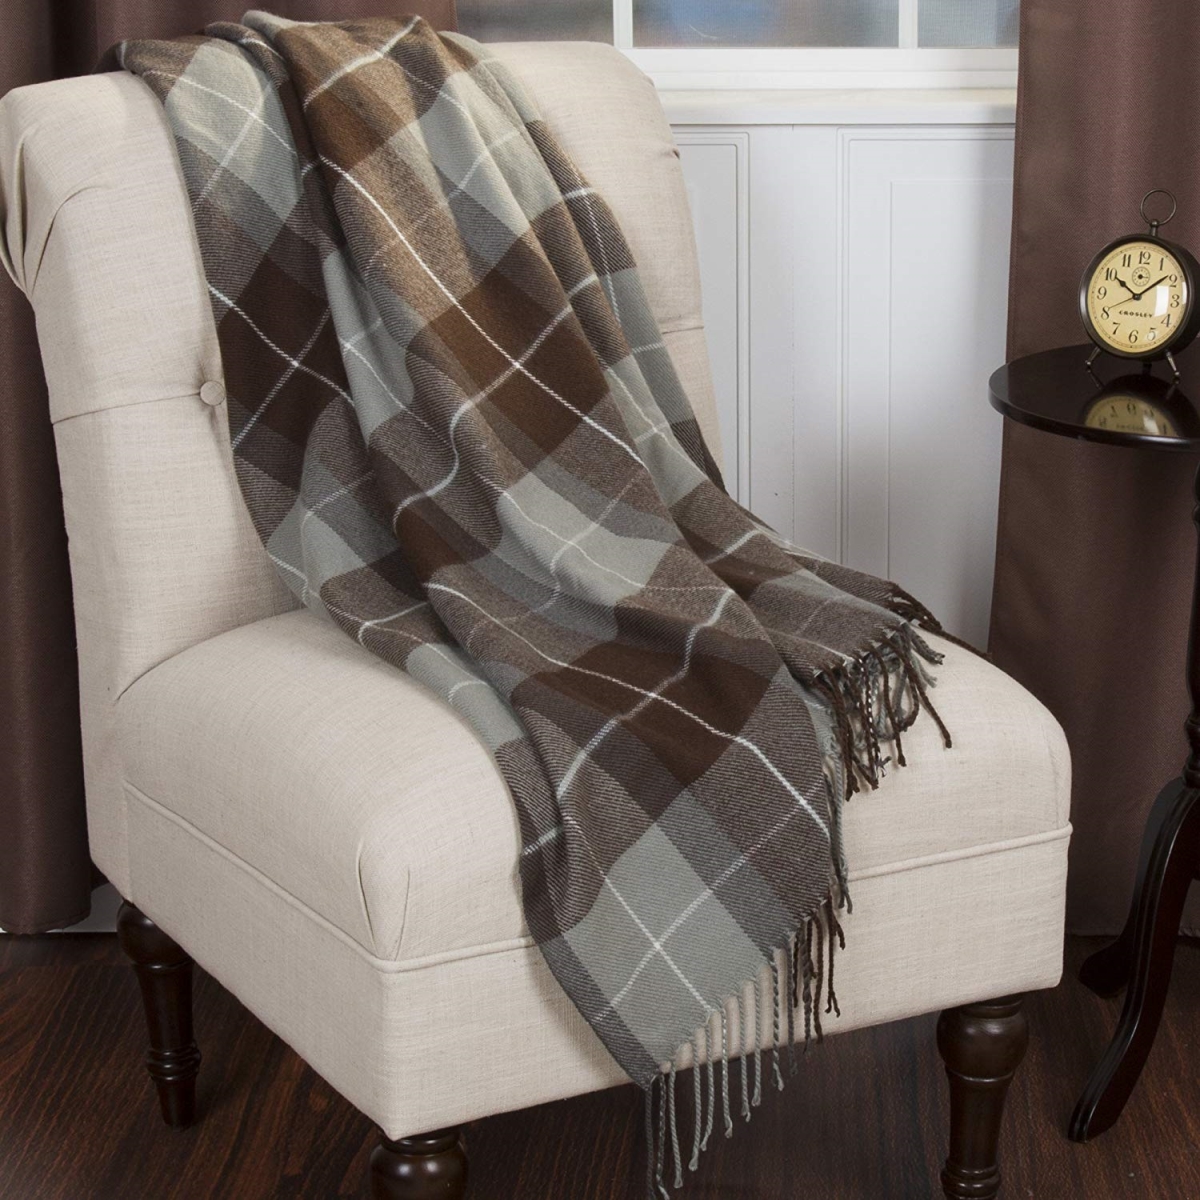 61a-71554 Cashmere Like Blanket Throw, Brown